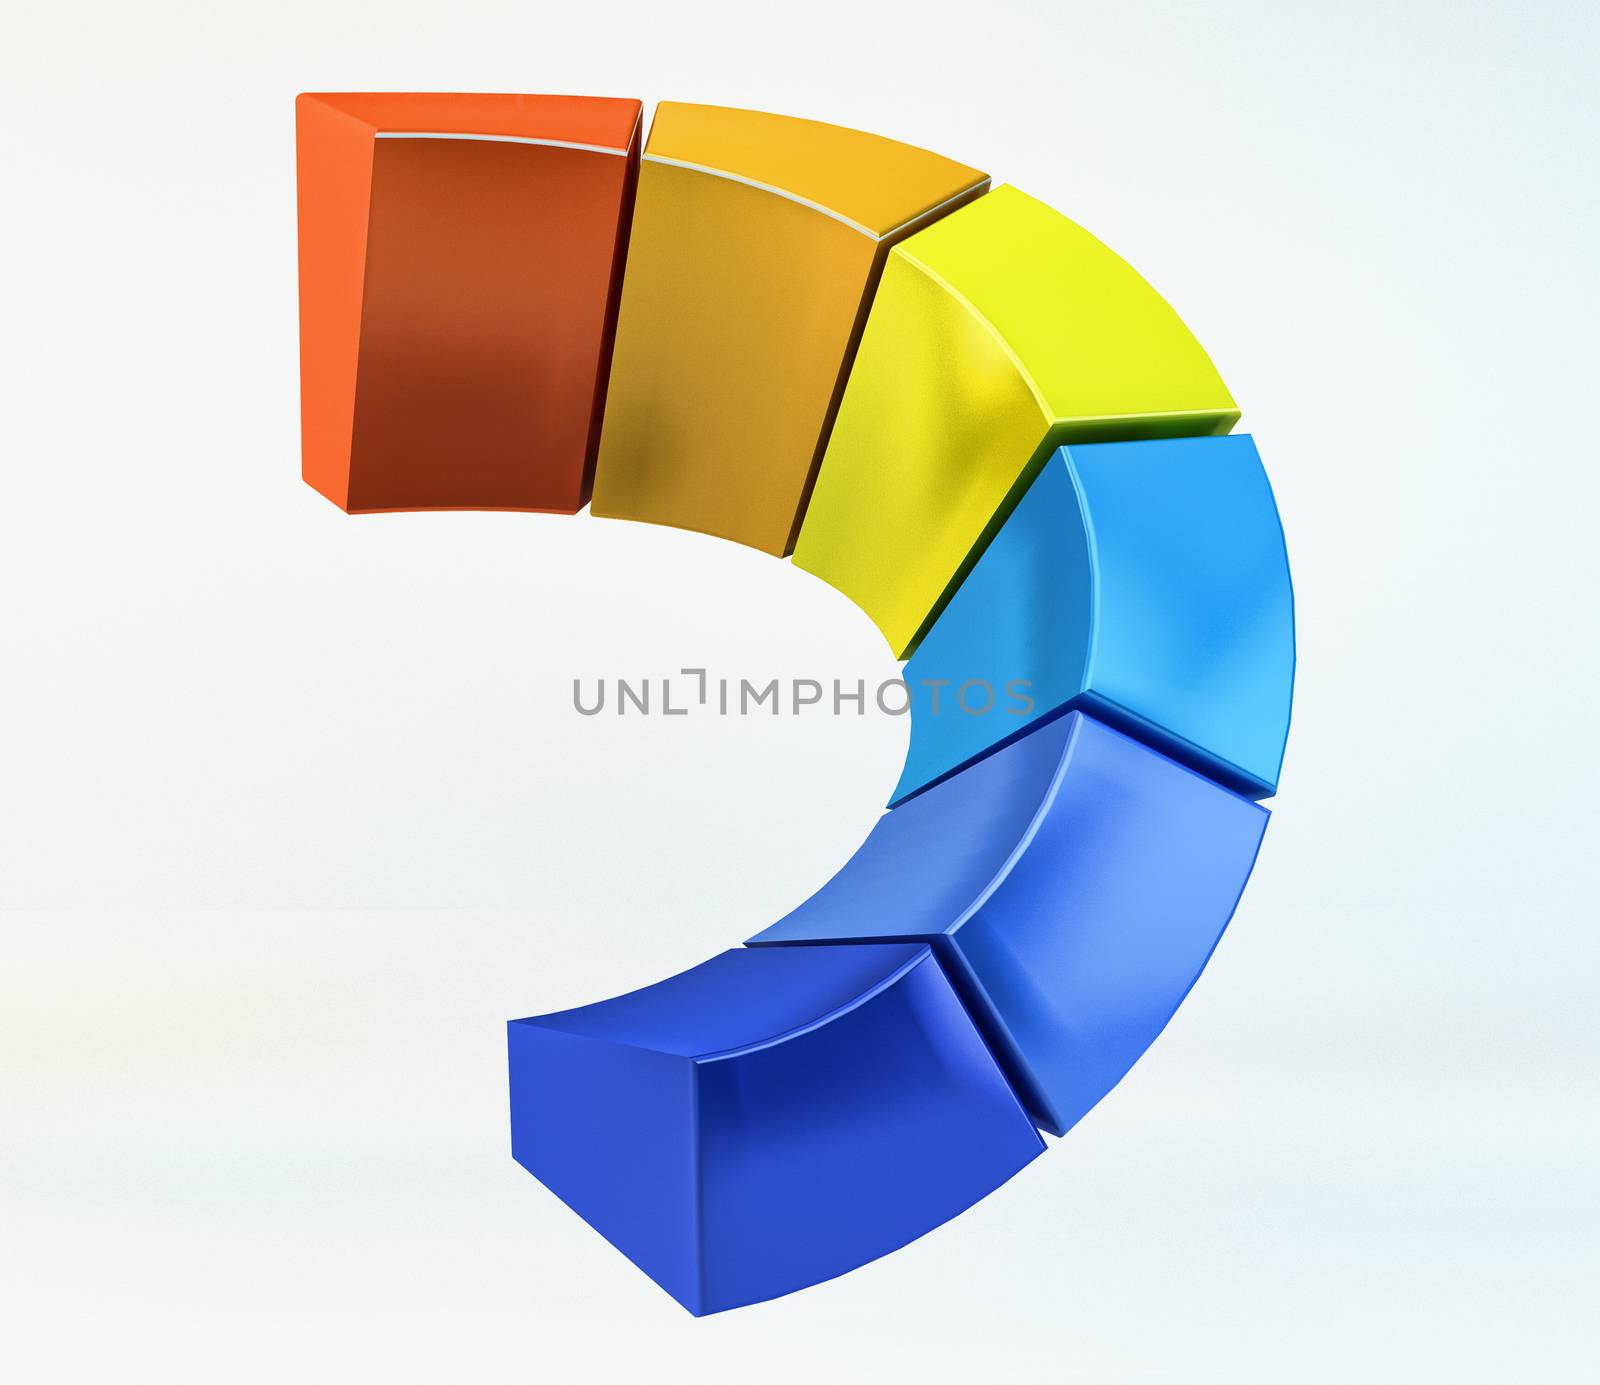 colour scale 3d logo. volumetric chromatic array logotype. from cold to warm shades